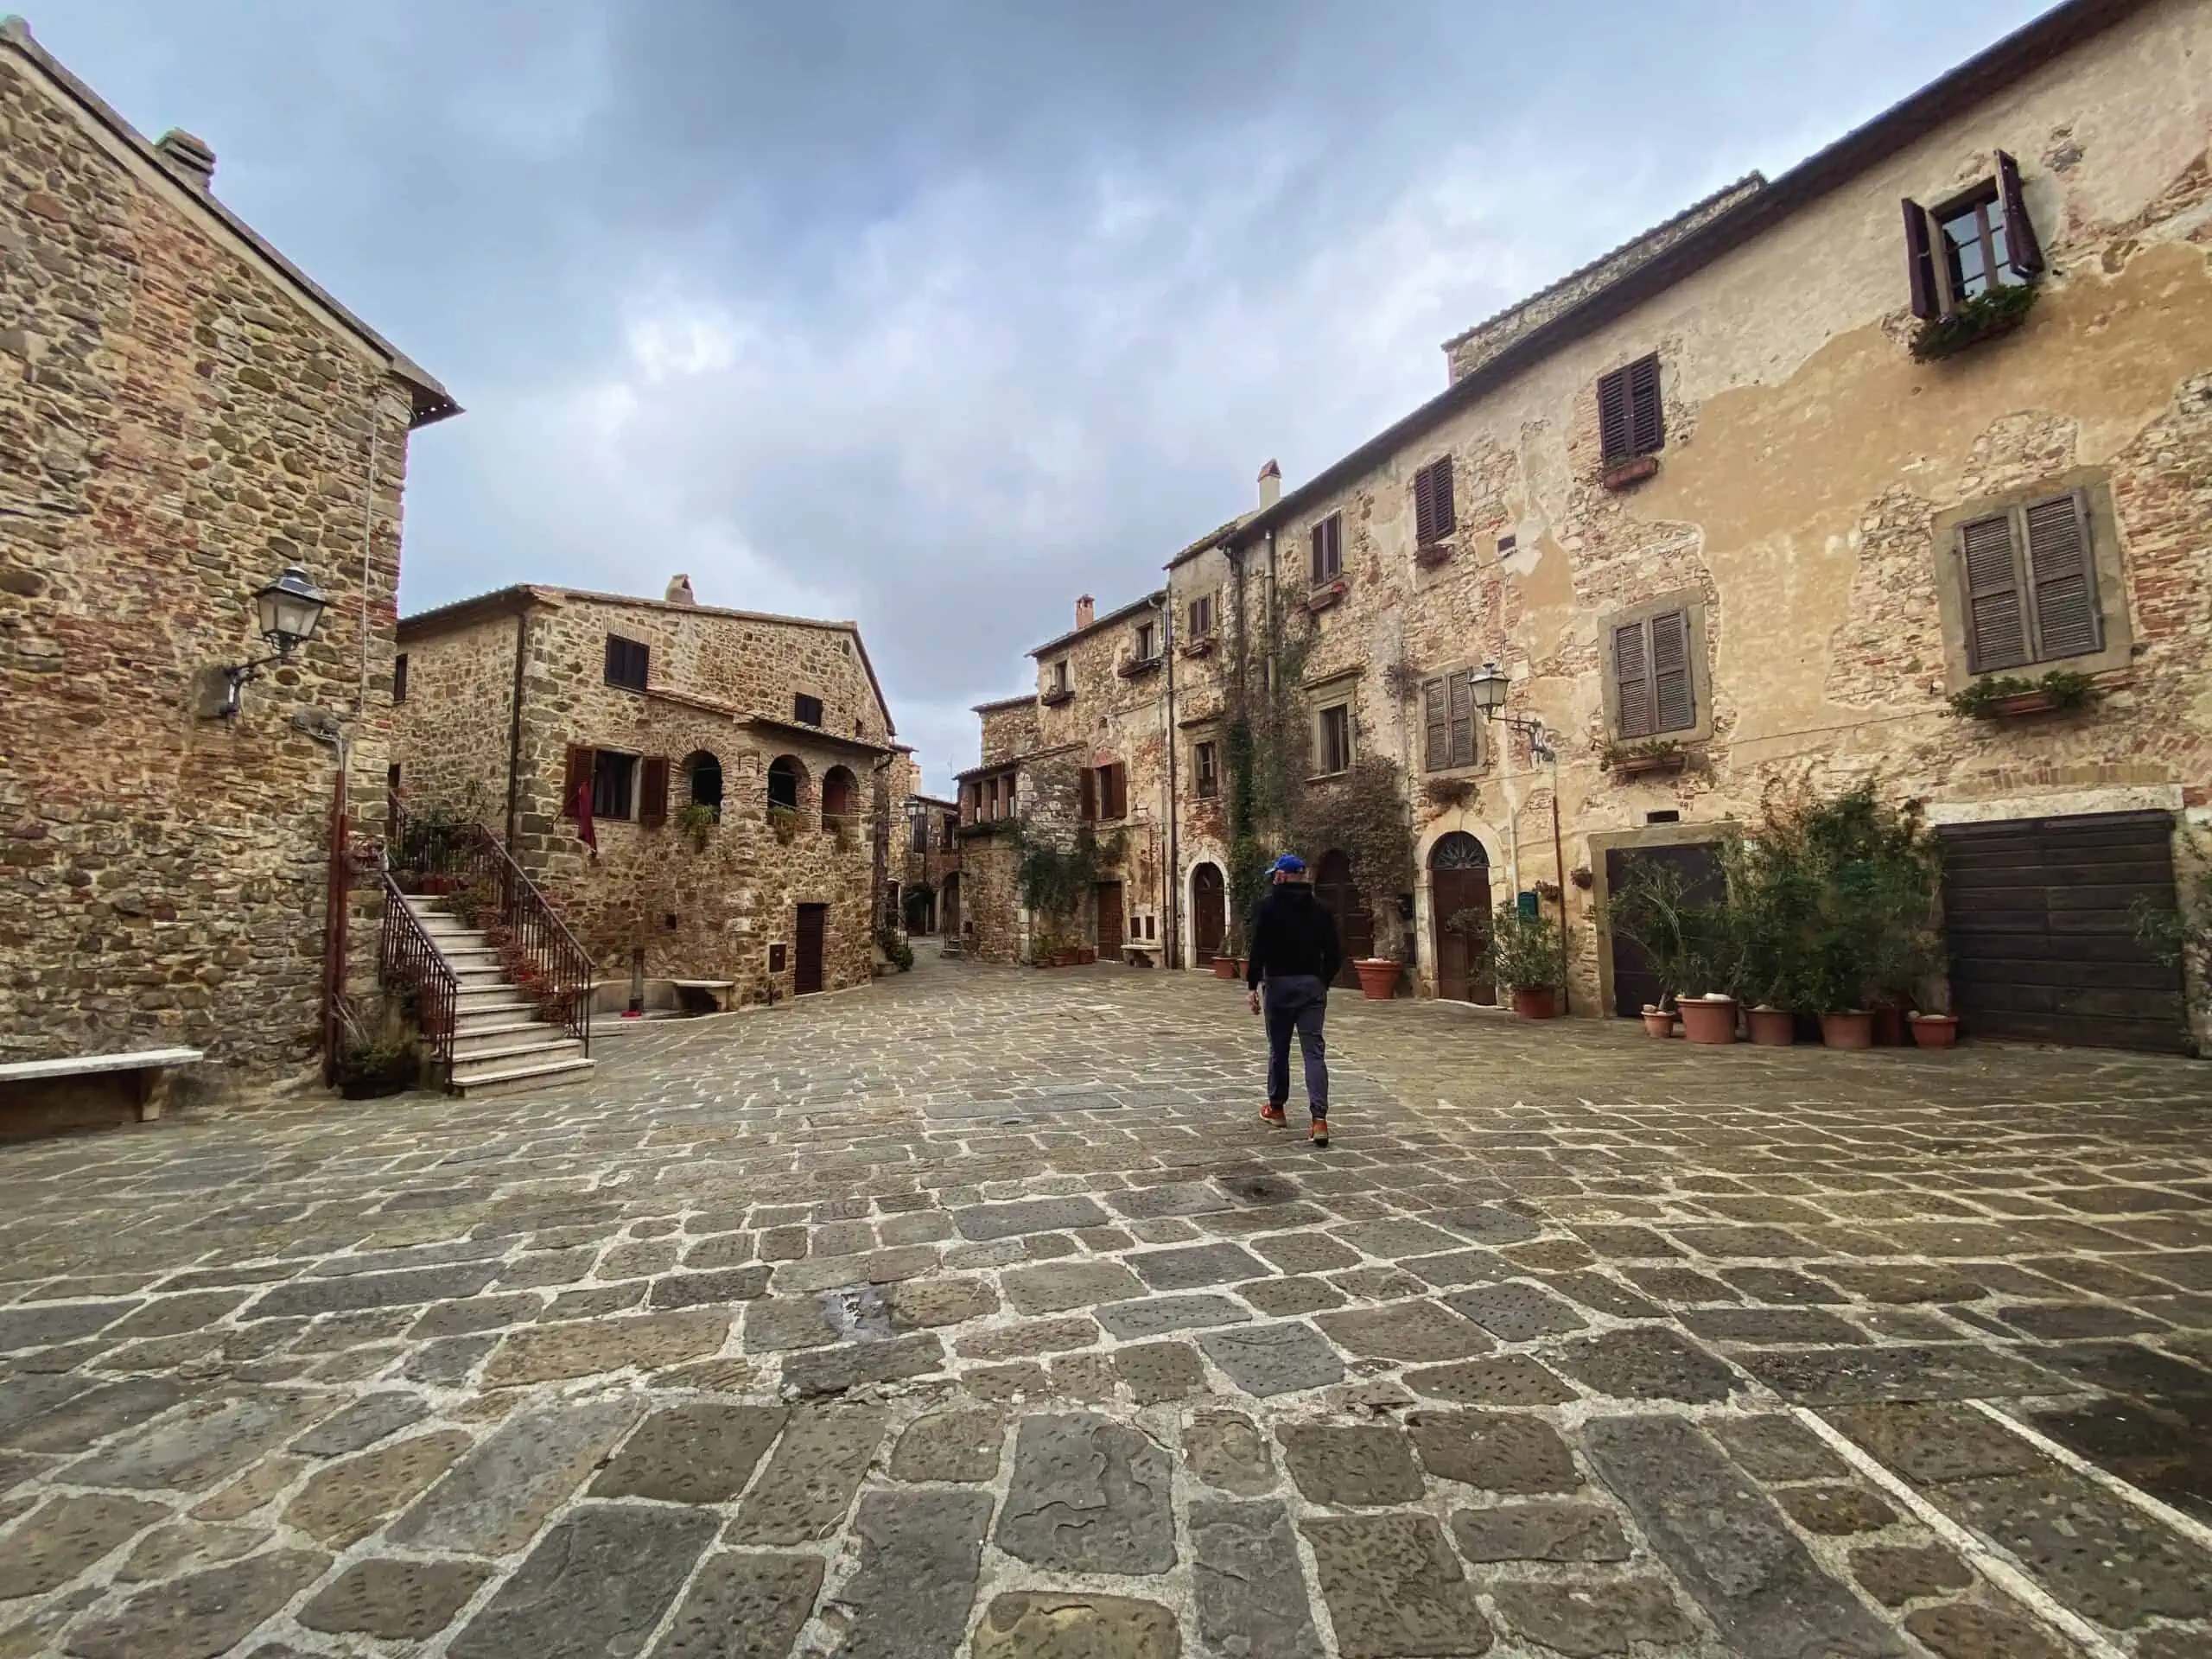 Man walking in Piazza del Castello in Montemerano, Tuscany. It's a cloudy day.